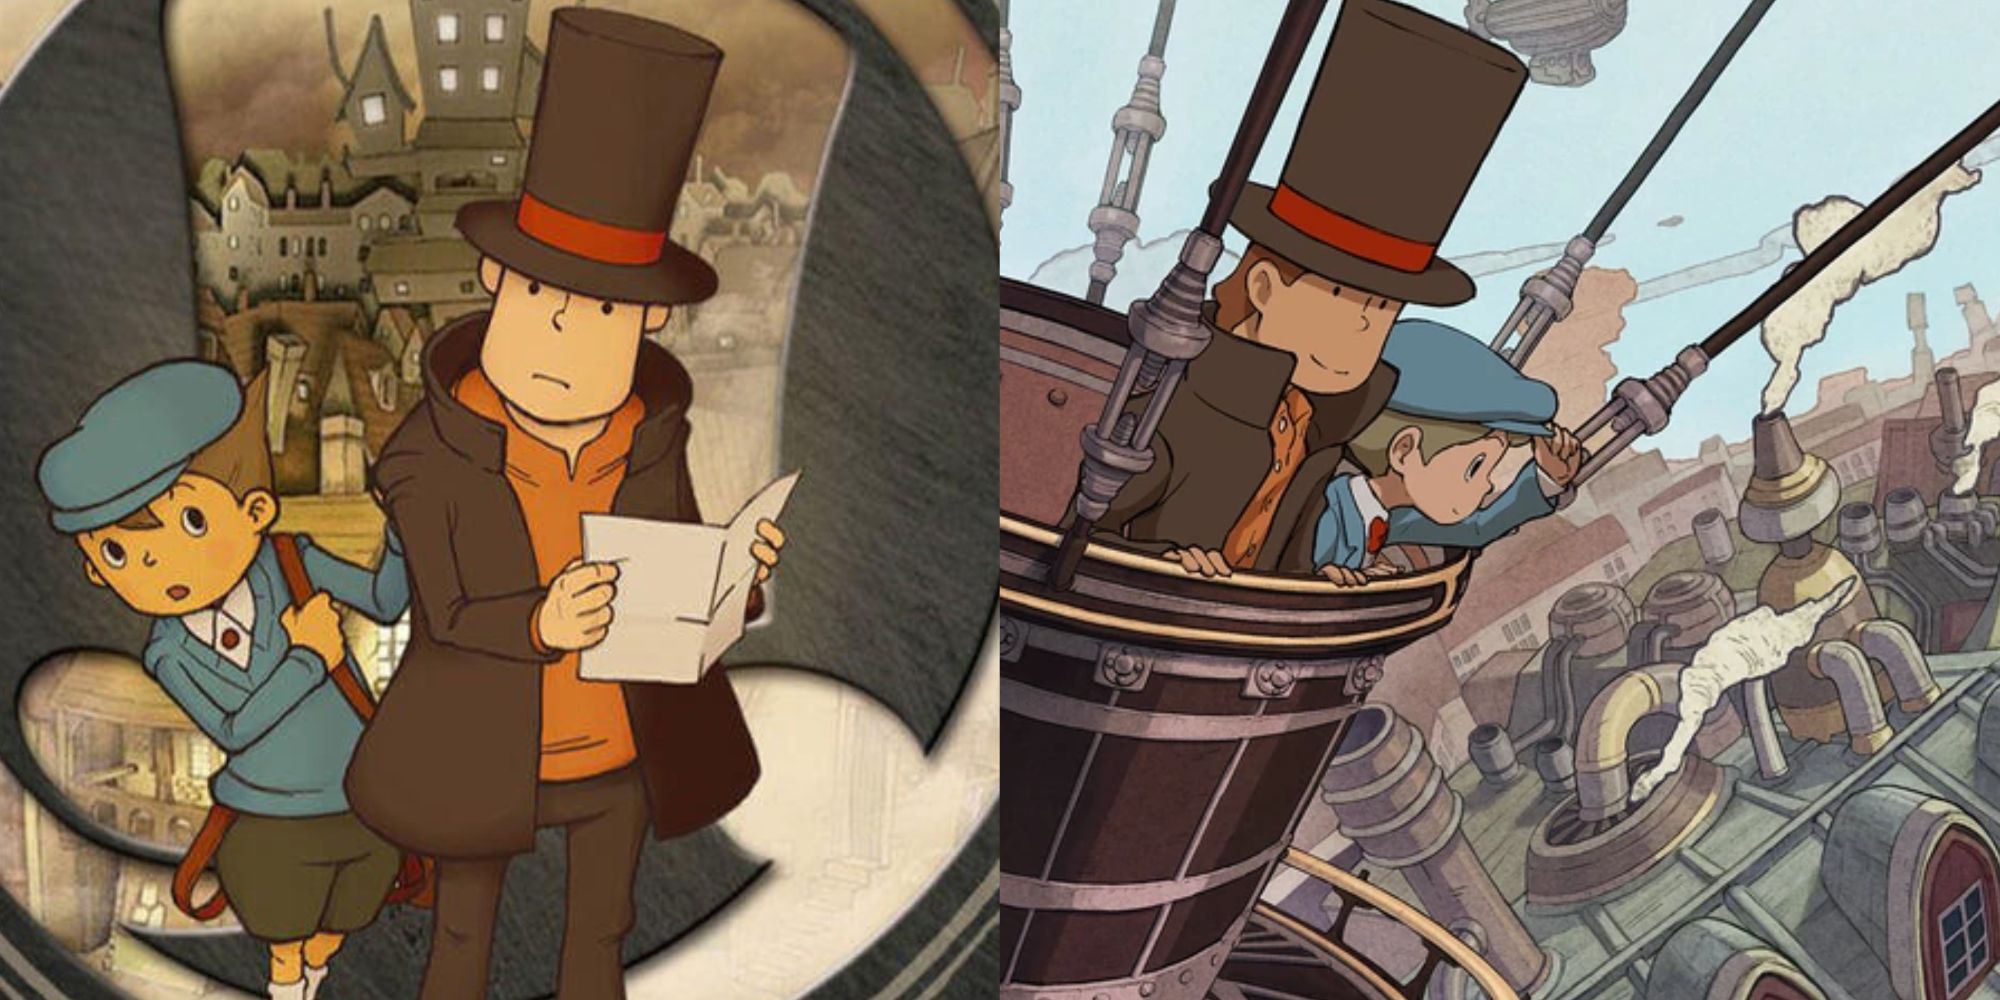 professor layton and the curious village and the new world of steam key art with layton and luke